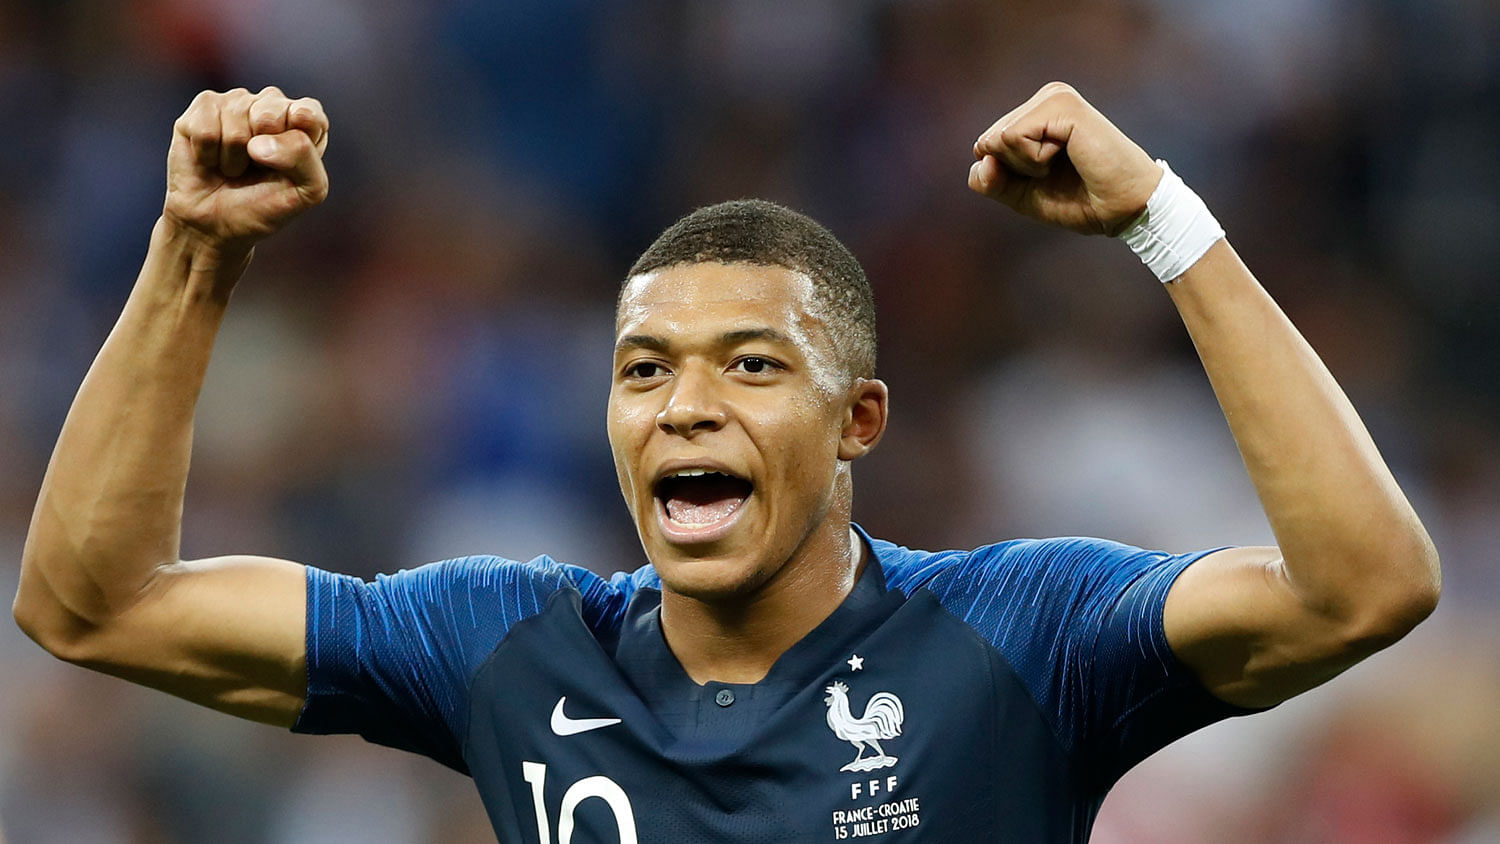 Kylian Mbappe was named the Best Young Player of the 2018 FIFA World Cup.